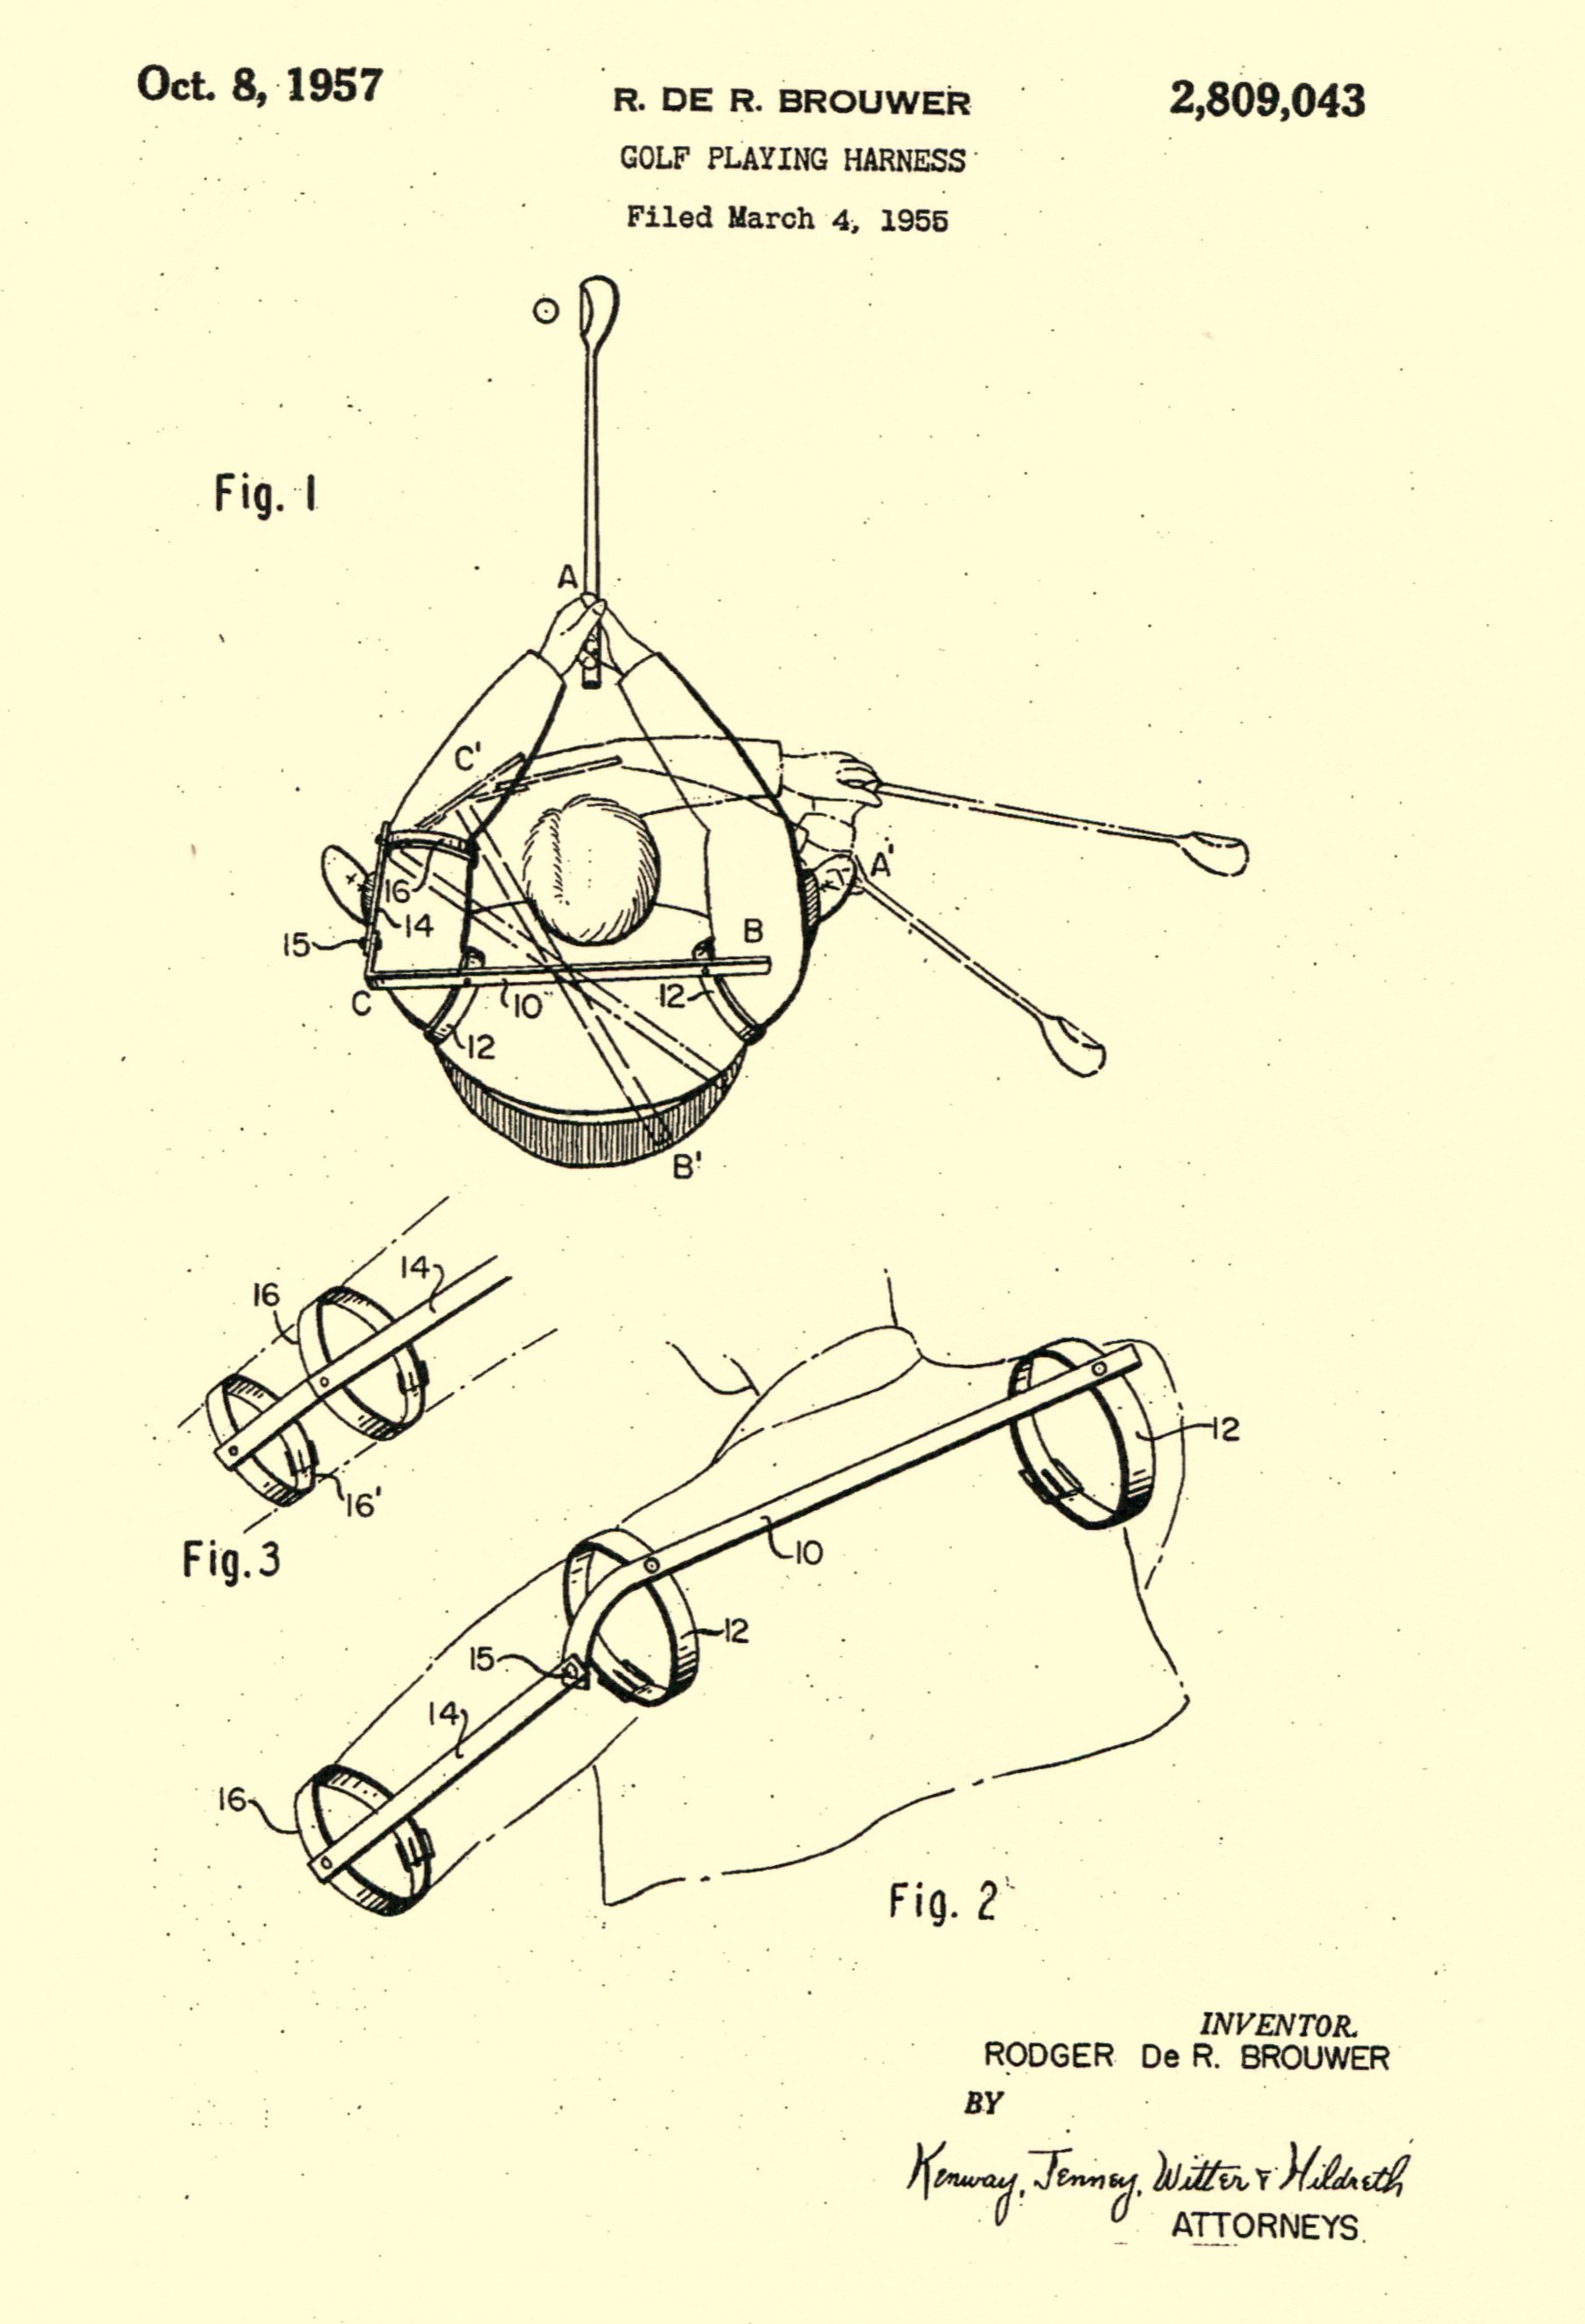 A photo of the patent drawing for a golf swing harness training aid.